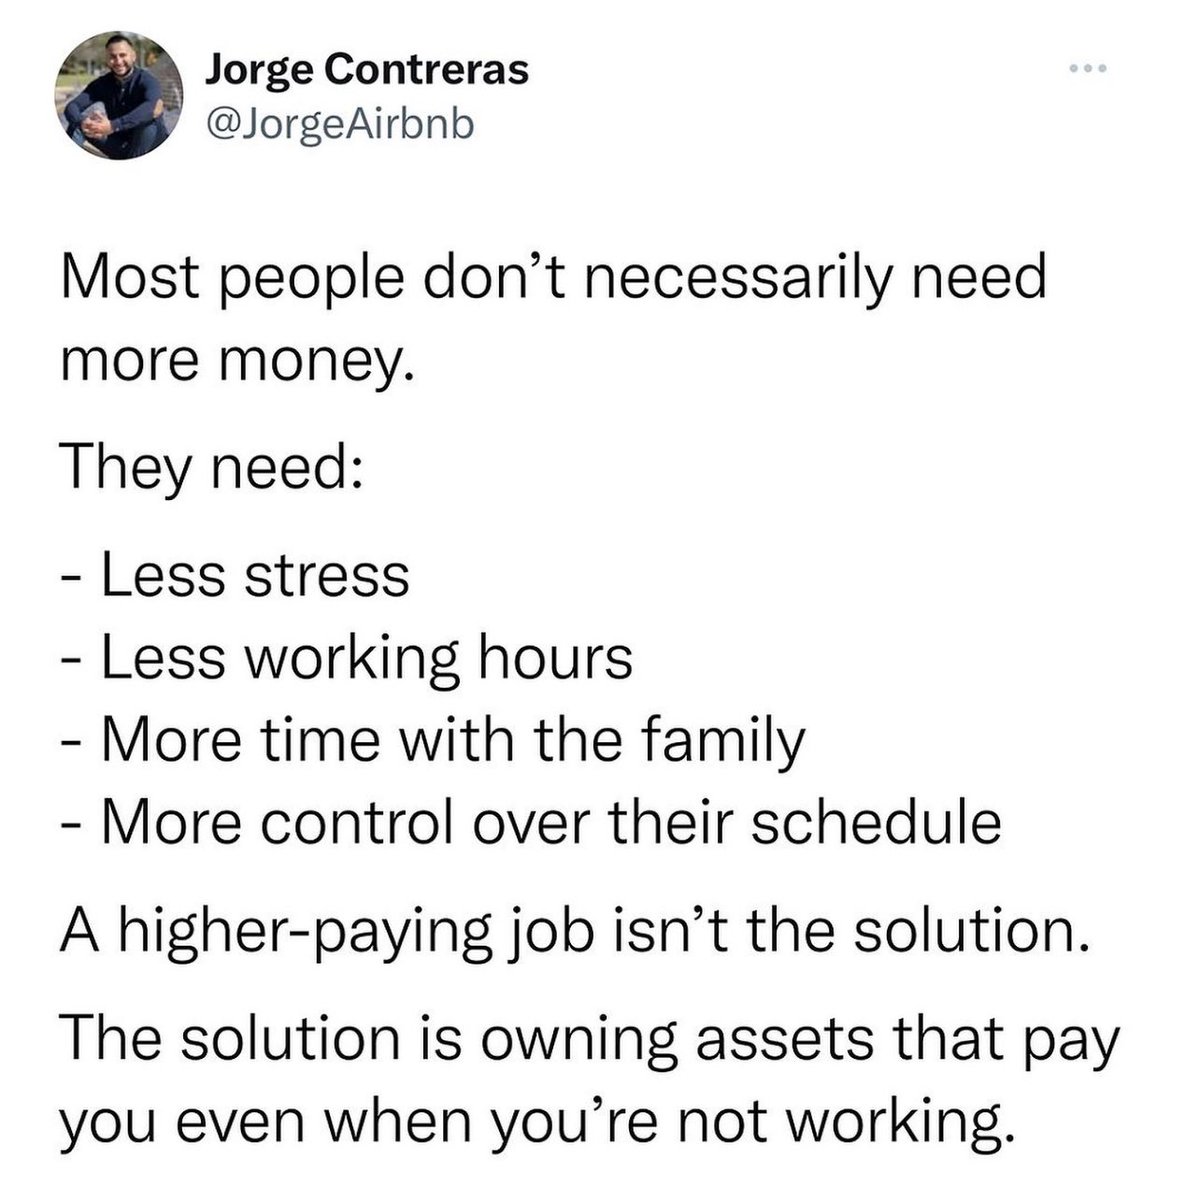 Well said. I’d rather have assets pay for a vacation, not a job. #freedomoftime #truewealth #passiveincome #realestateinvesting #dividendstocks #cashflow #buildwealth #claytrader